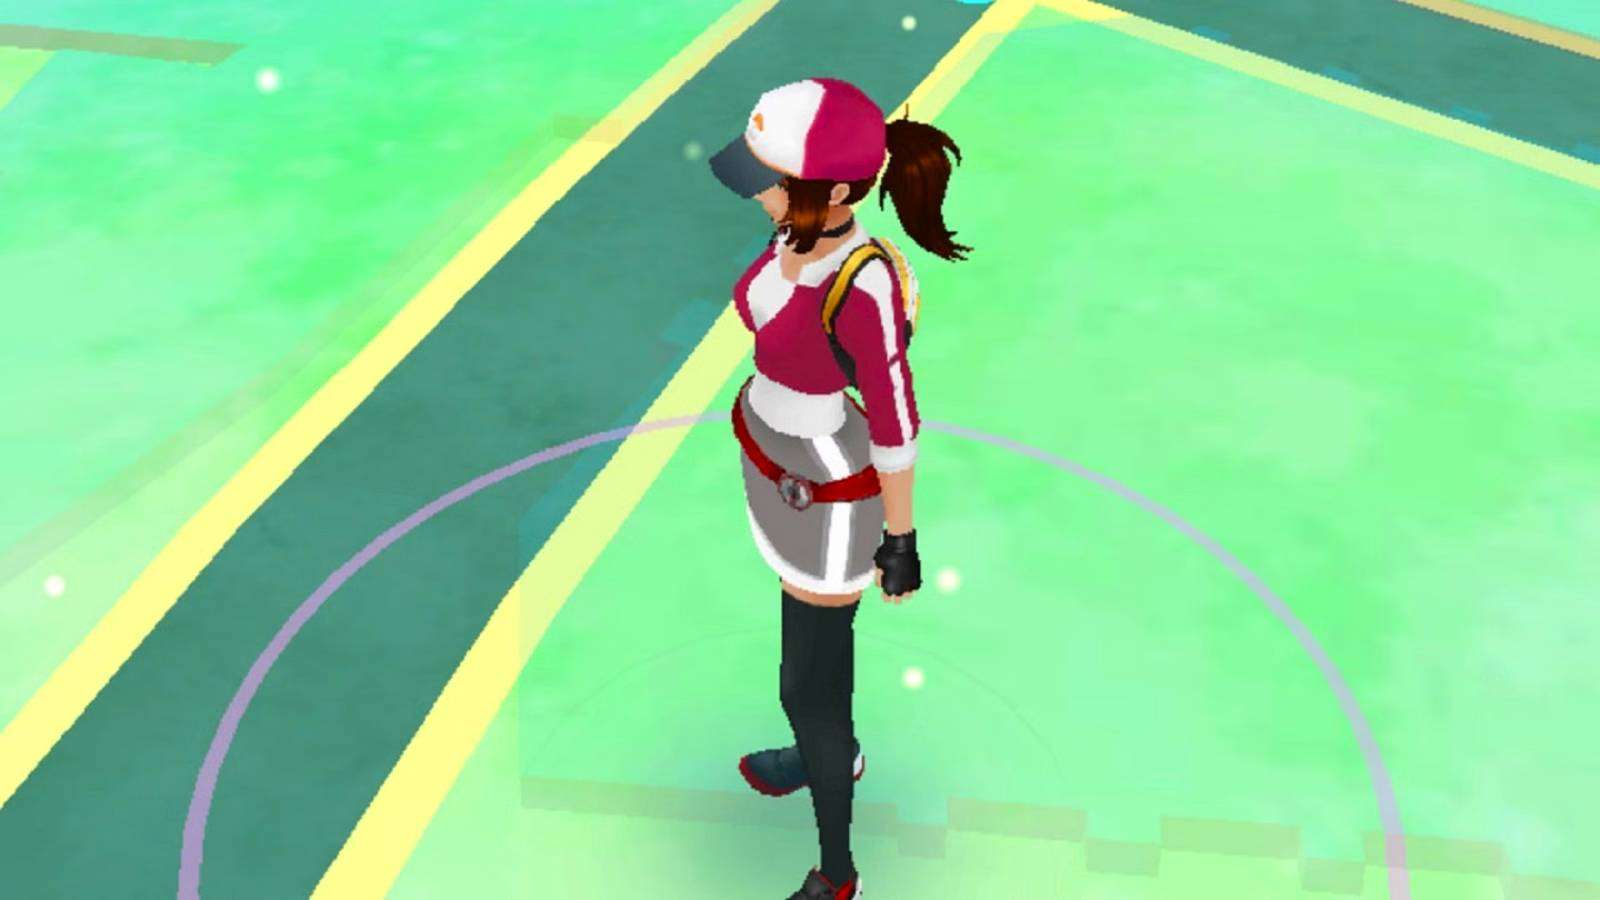 Pokemon Go rural player playing the game.